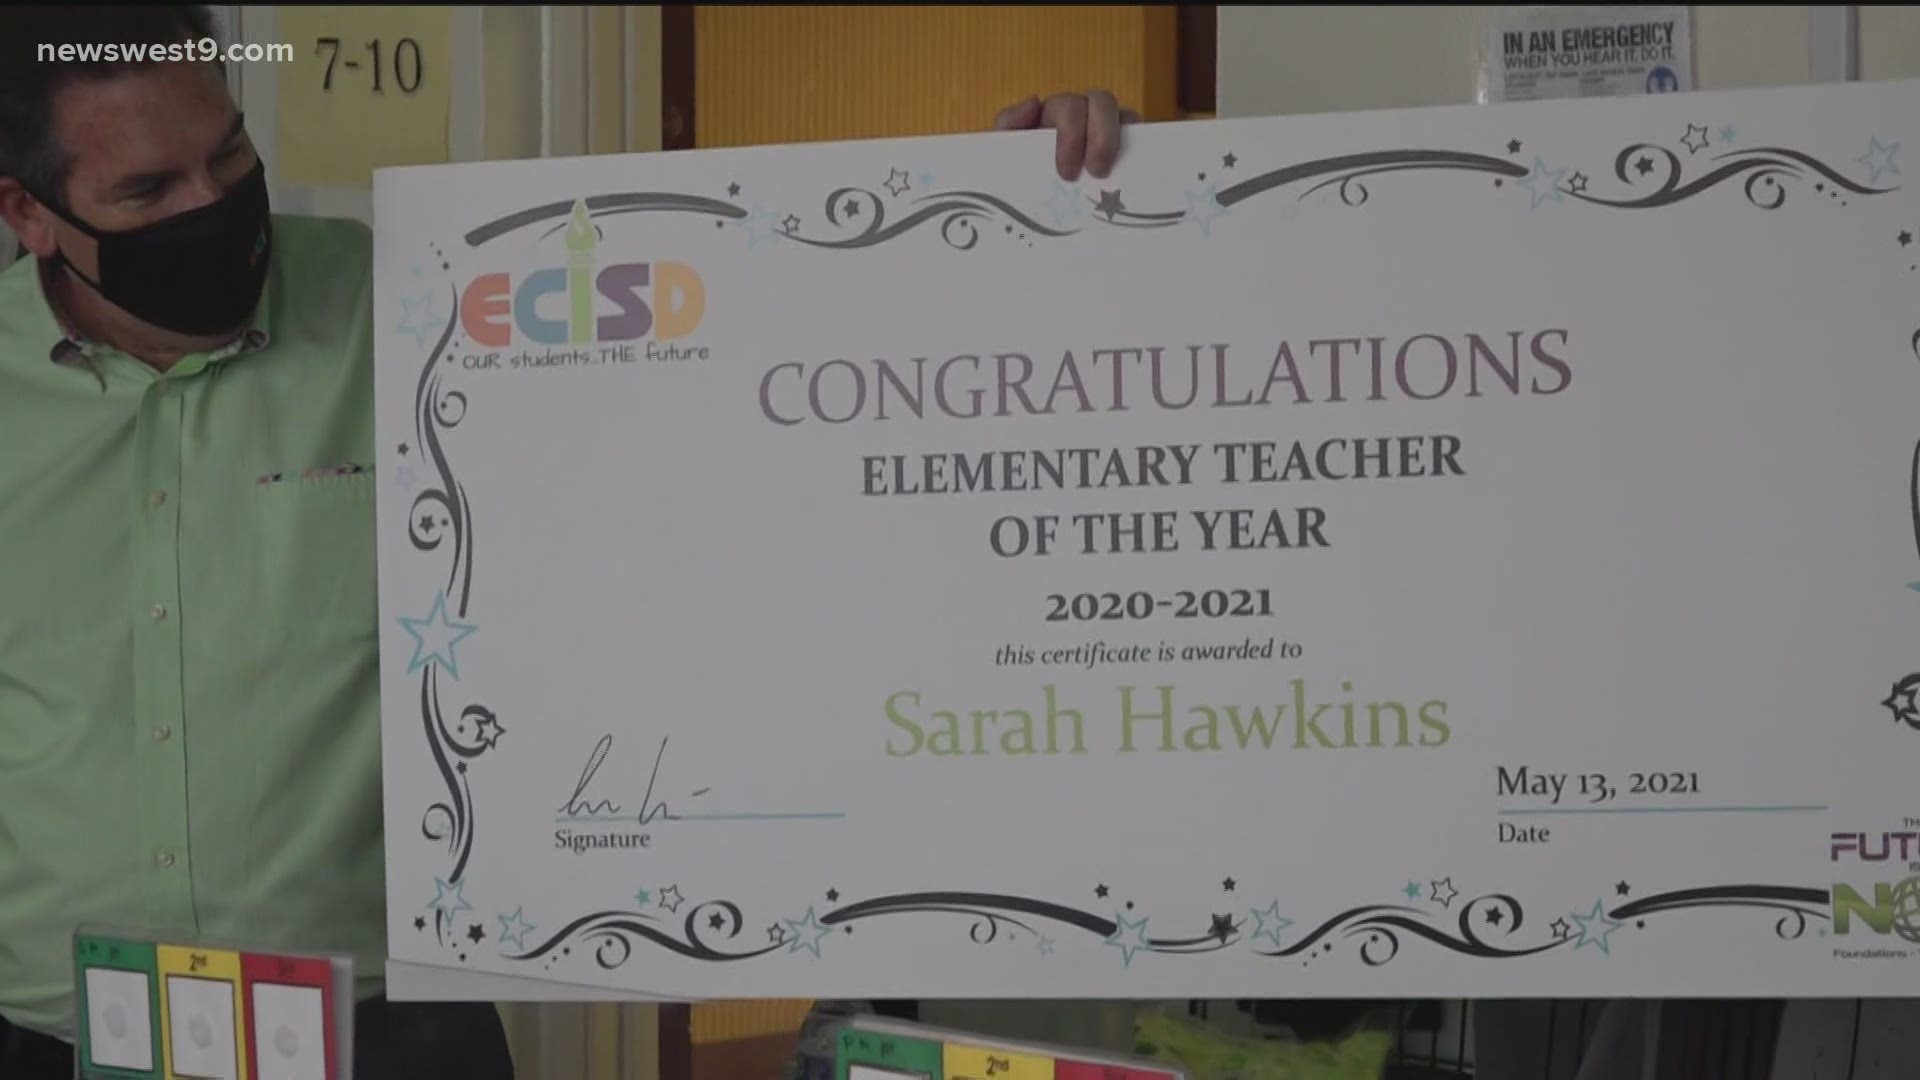 Two teachers were also surprised with Teacher of the Year awards.